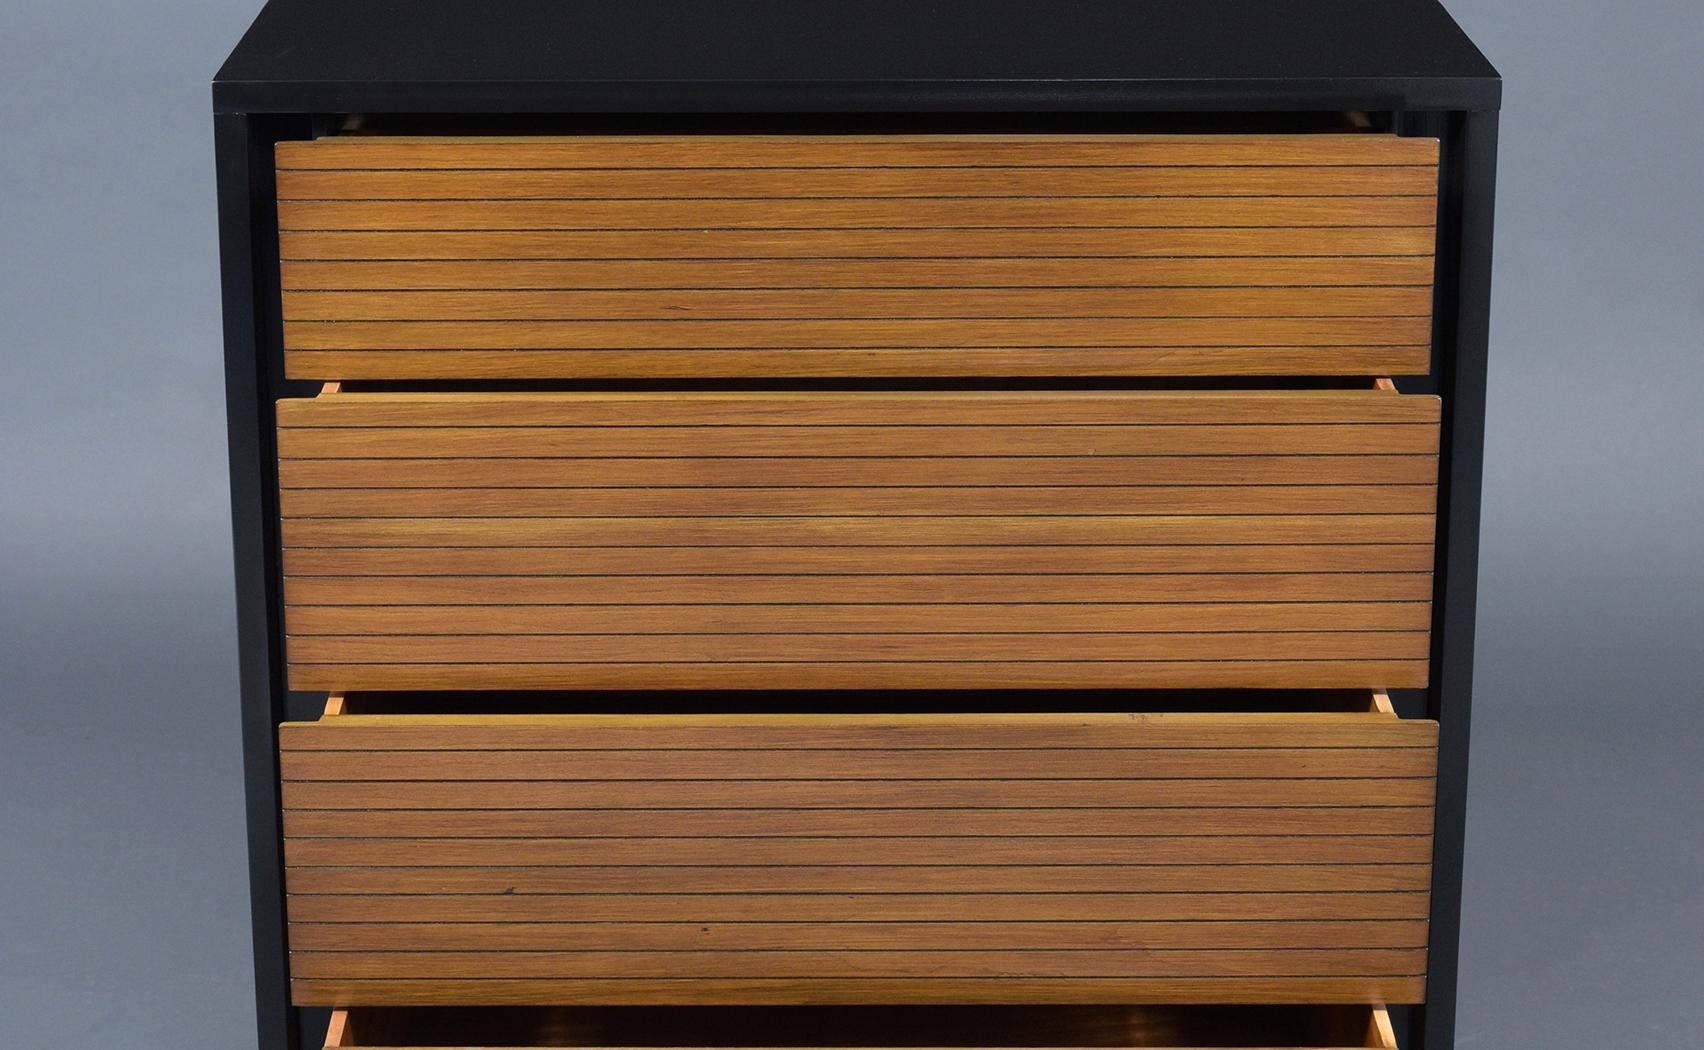 1960s Henredon Walnut Chest of Drawers: Mid-Century Modern Design with Mobility In Good Condition For Sale In Los Angeles, CA